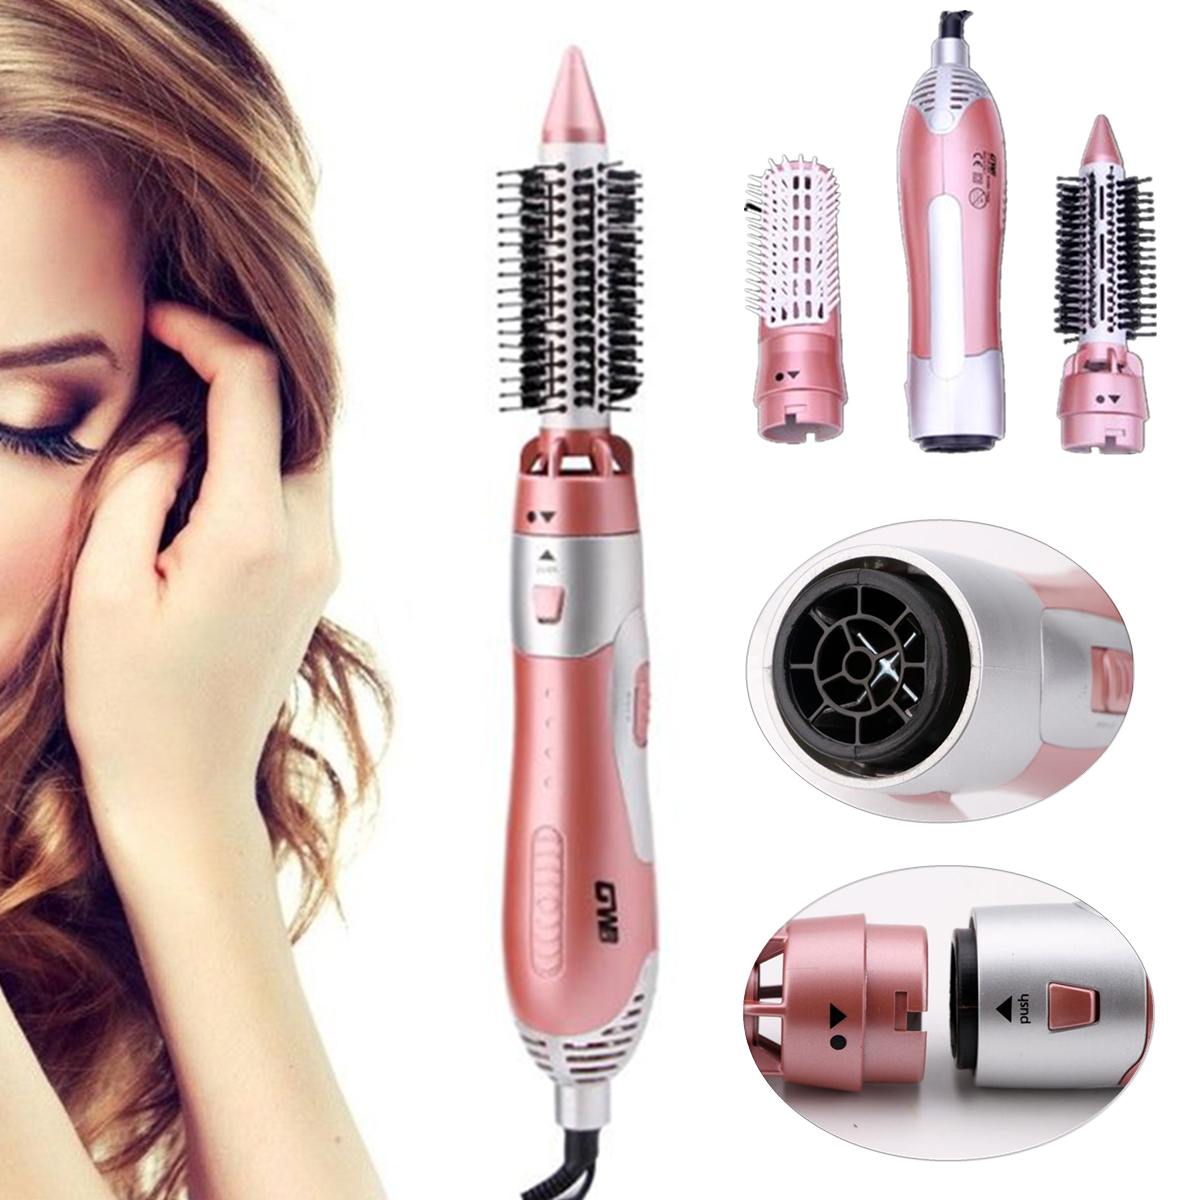 

2 IN 1 Multifunctional Styling Tool Hair Dryer Curler Comb